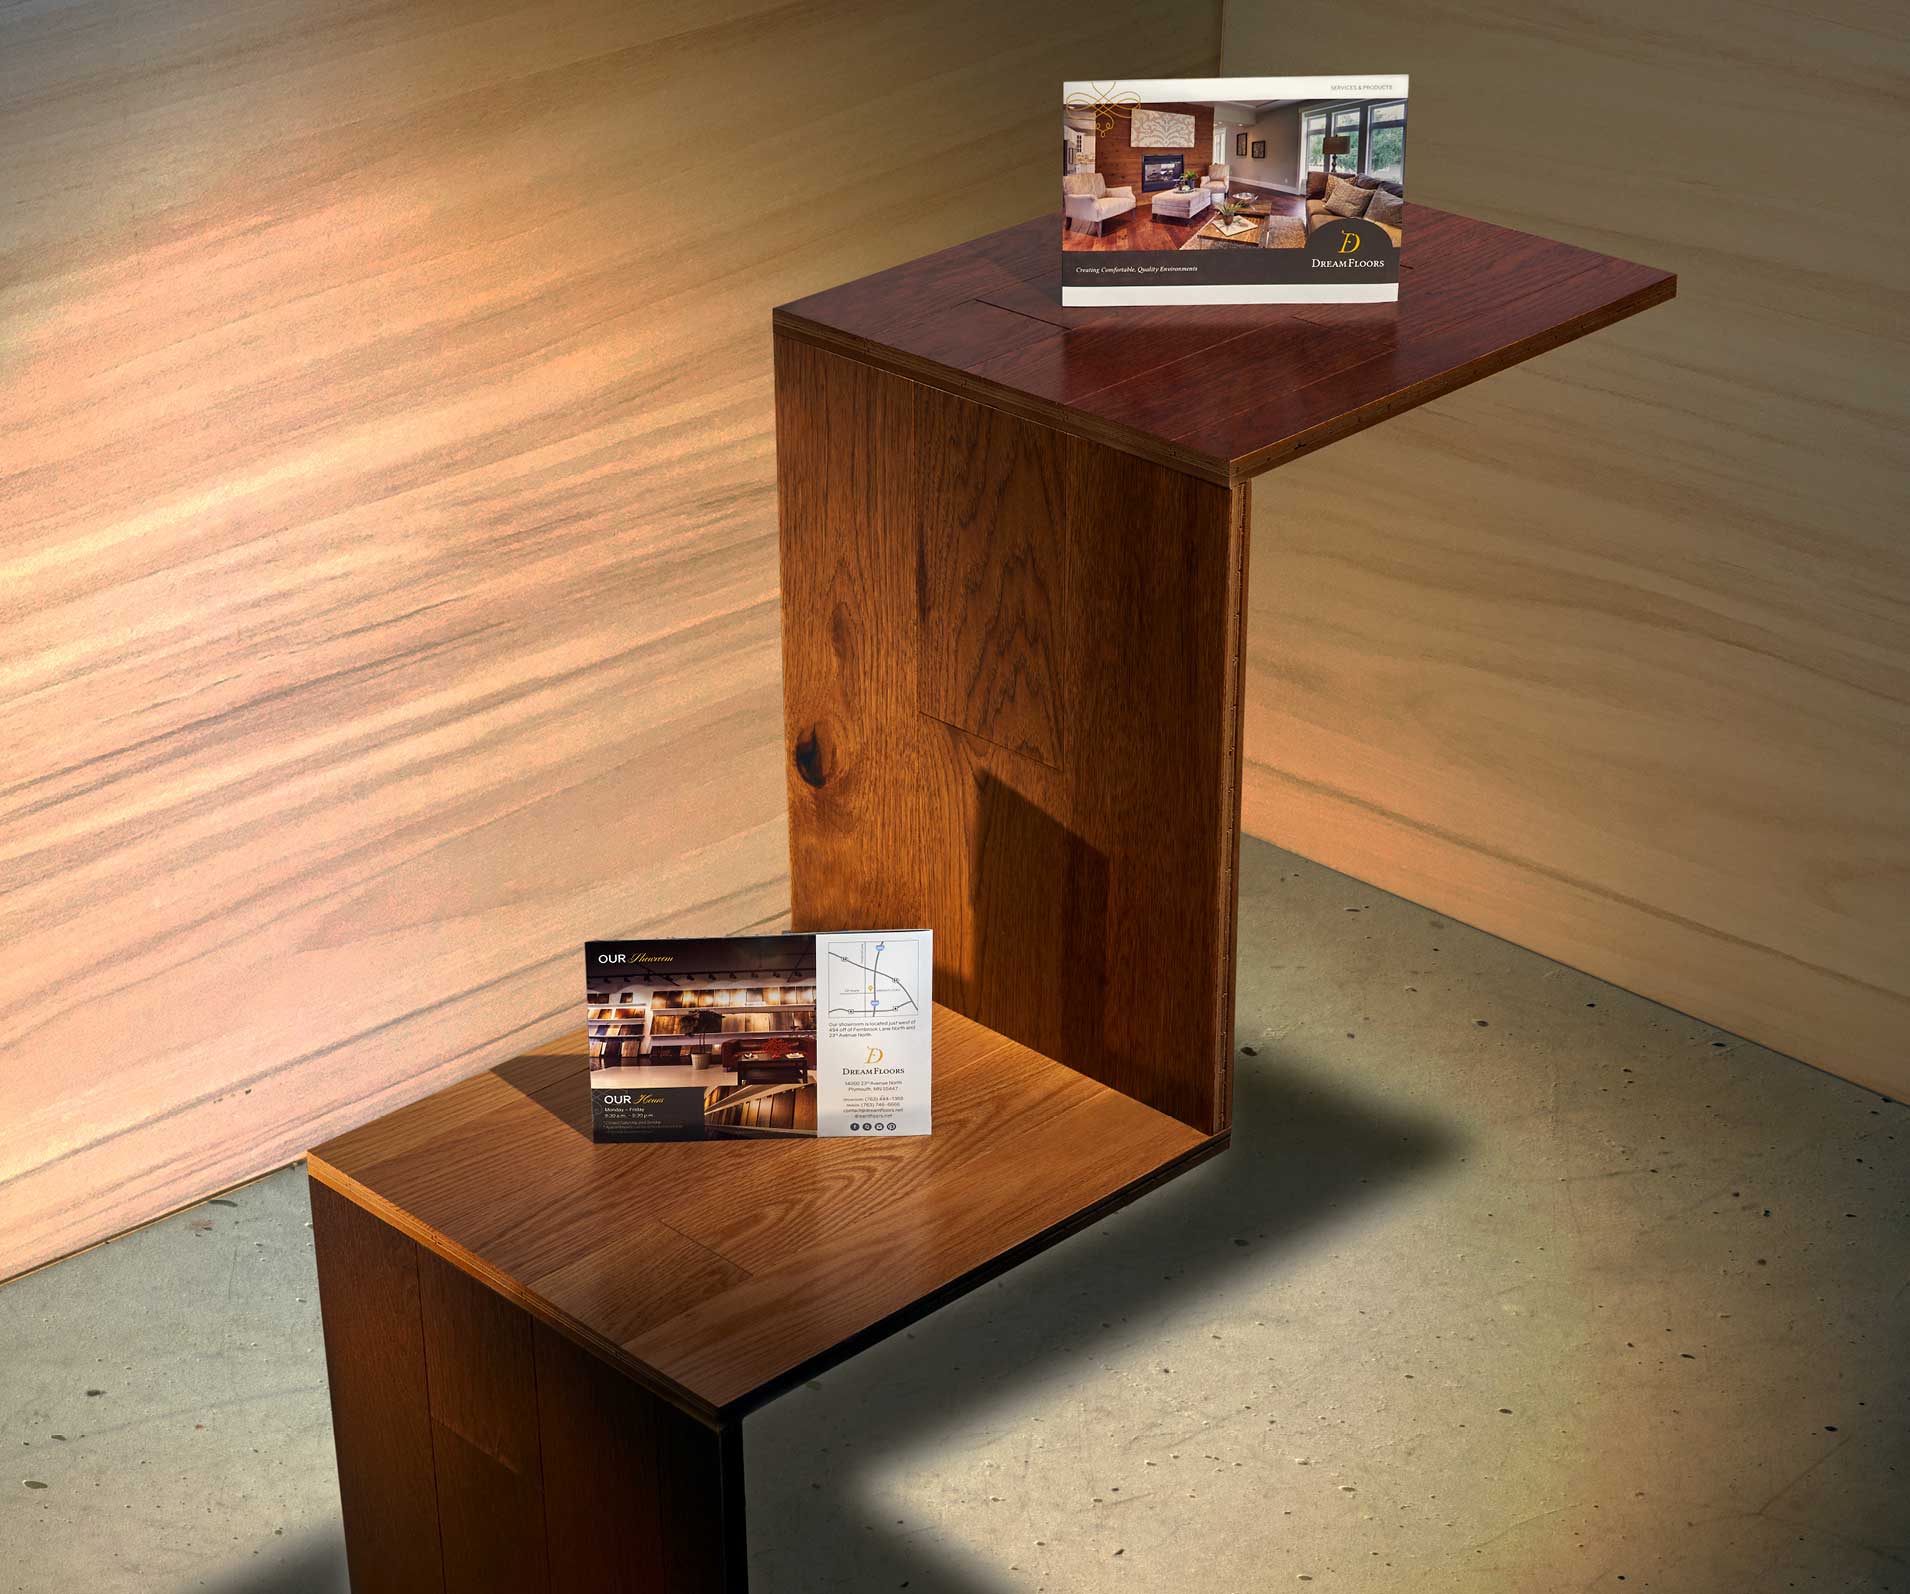 The Dream Floors brochure cover and back side sit on a staircase built out of flooring panels.